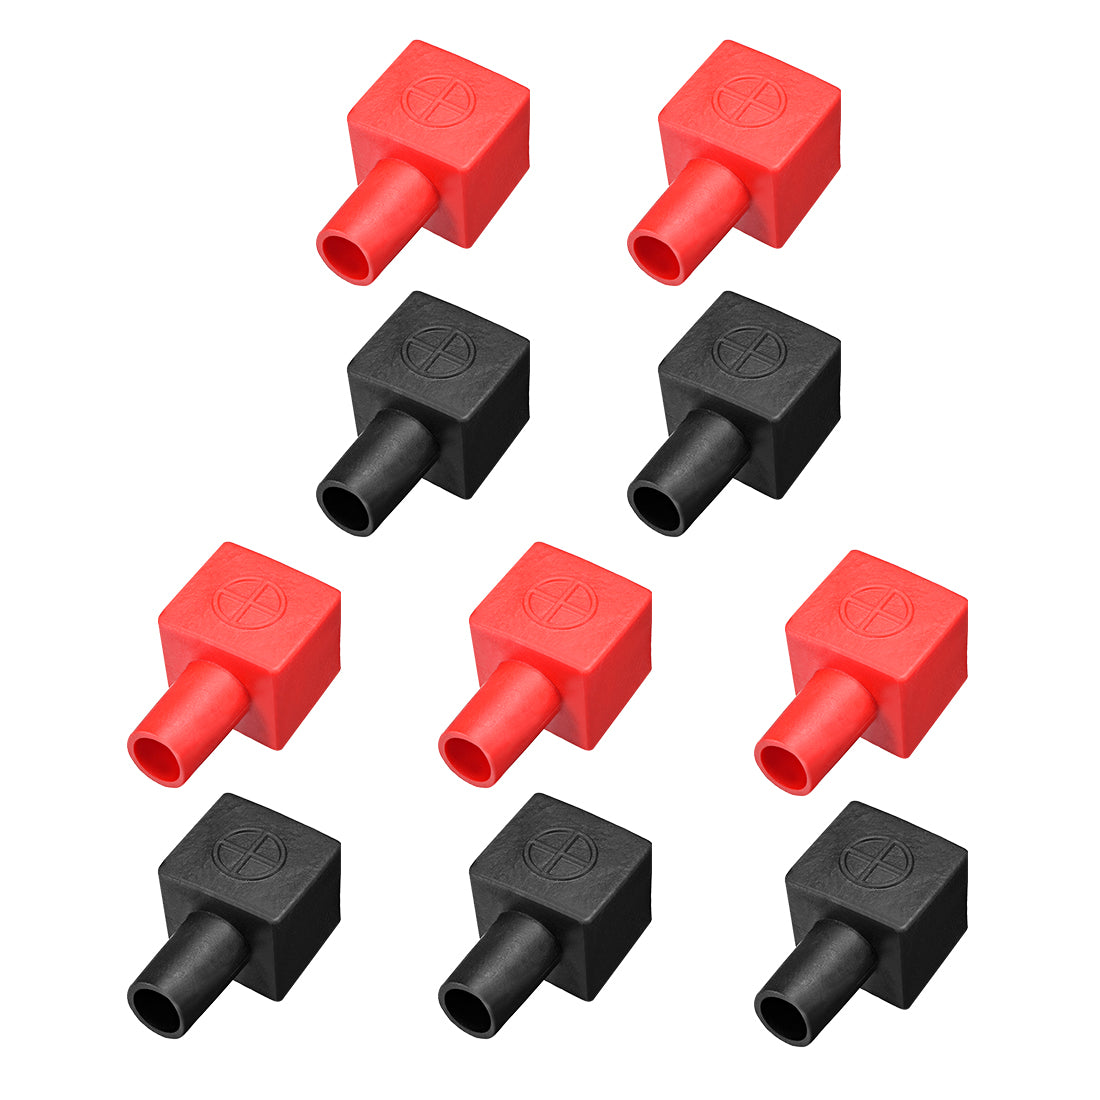 uxcell Uxcell Battery Terminal Insulating Rubber Protector Covers Square for 7mm Cable 14mm Terminal Red Black 5 Pairs